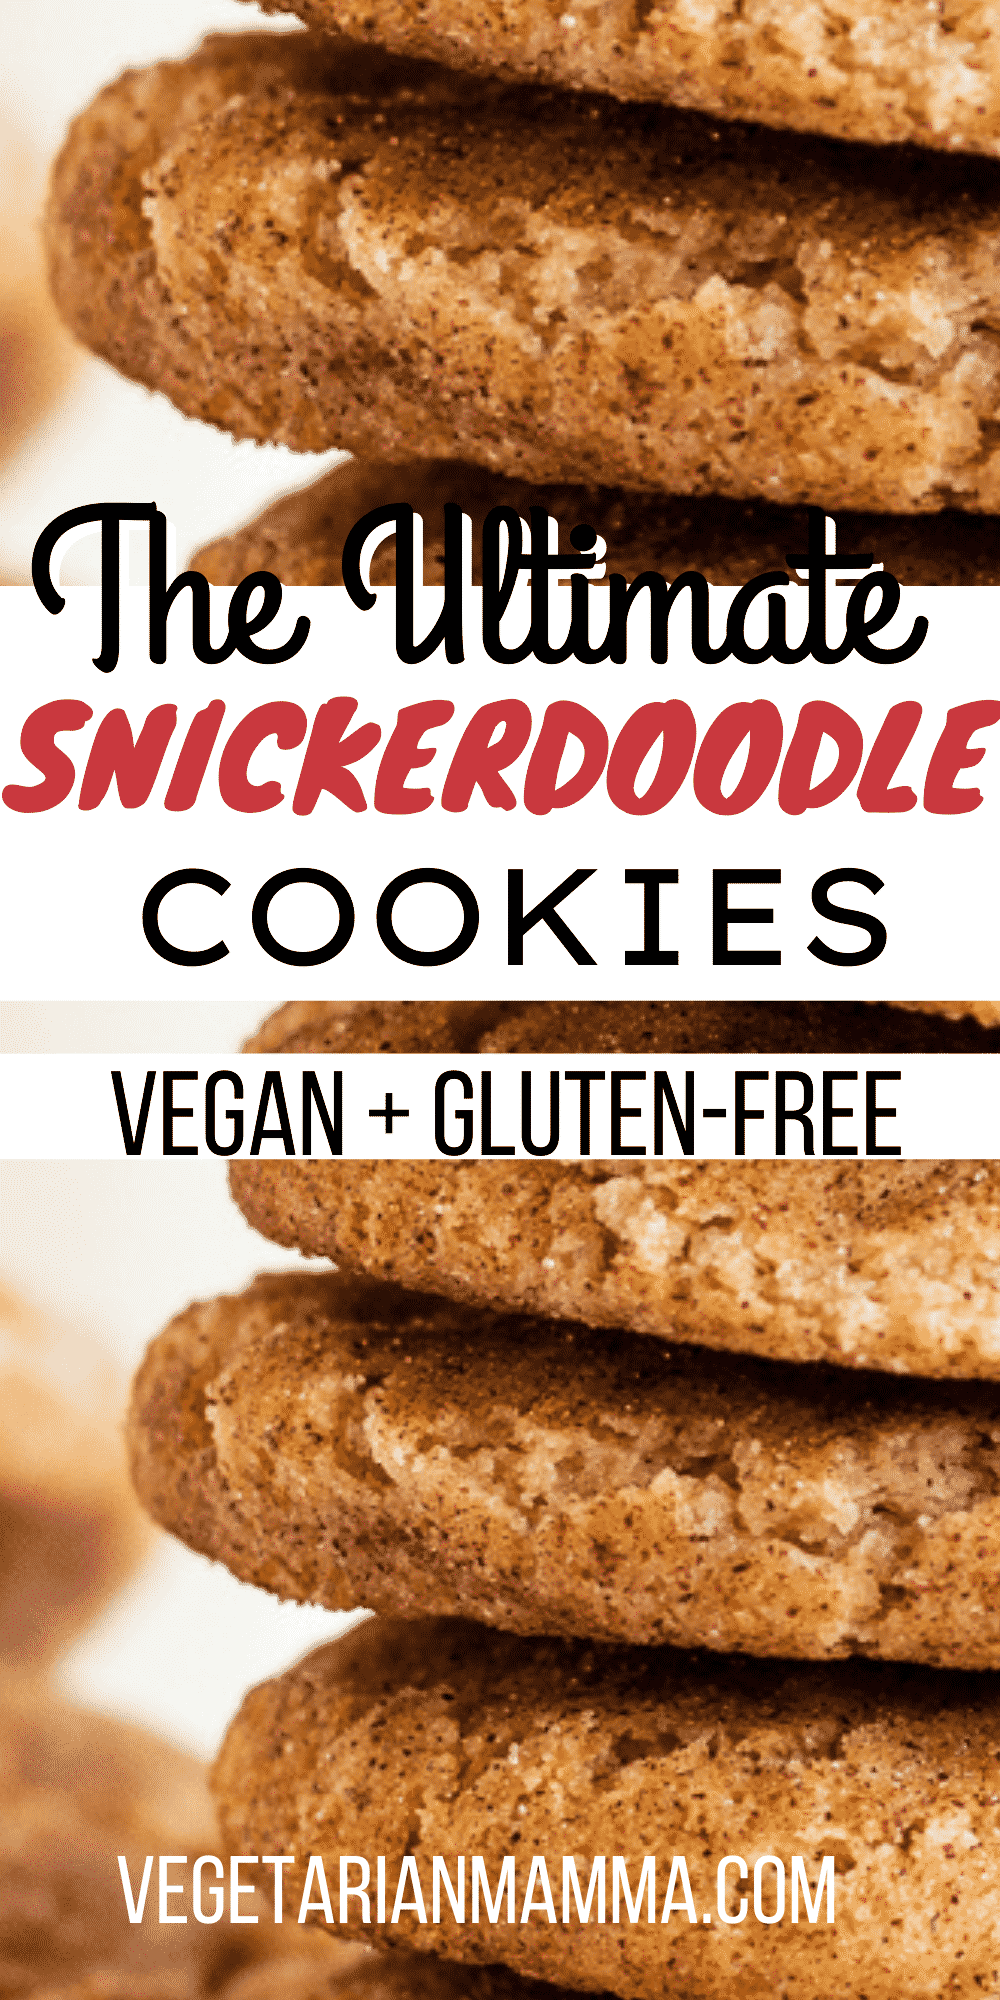 Vegan Snickerdoodle Cookies are so chewy and soft, you'll never believe they're gluten-free! Rolled in homemade cinnamon sugar, they're the perfect simple cookie recipe. #veganbaking #glutenfreecookies